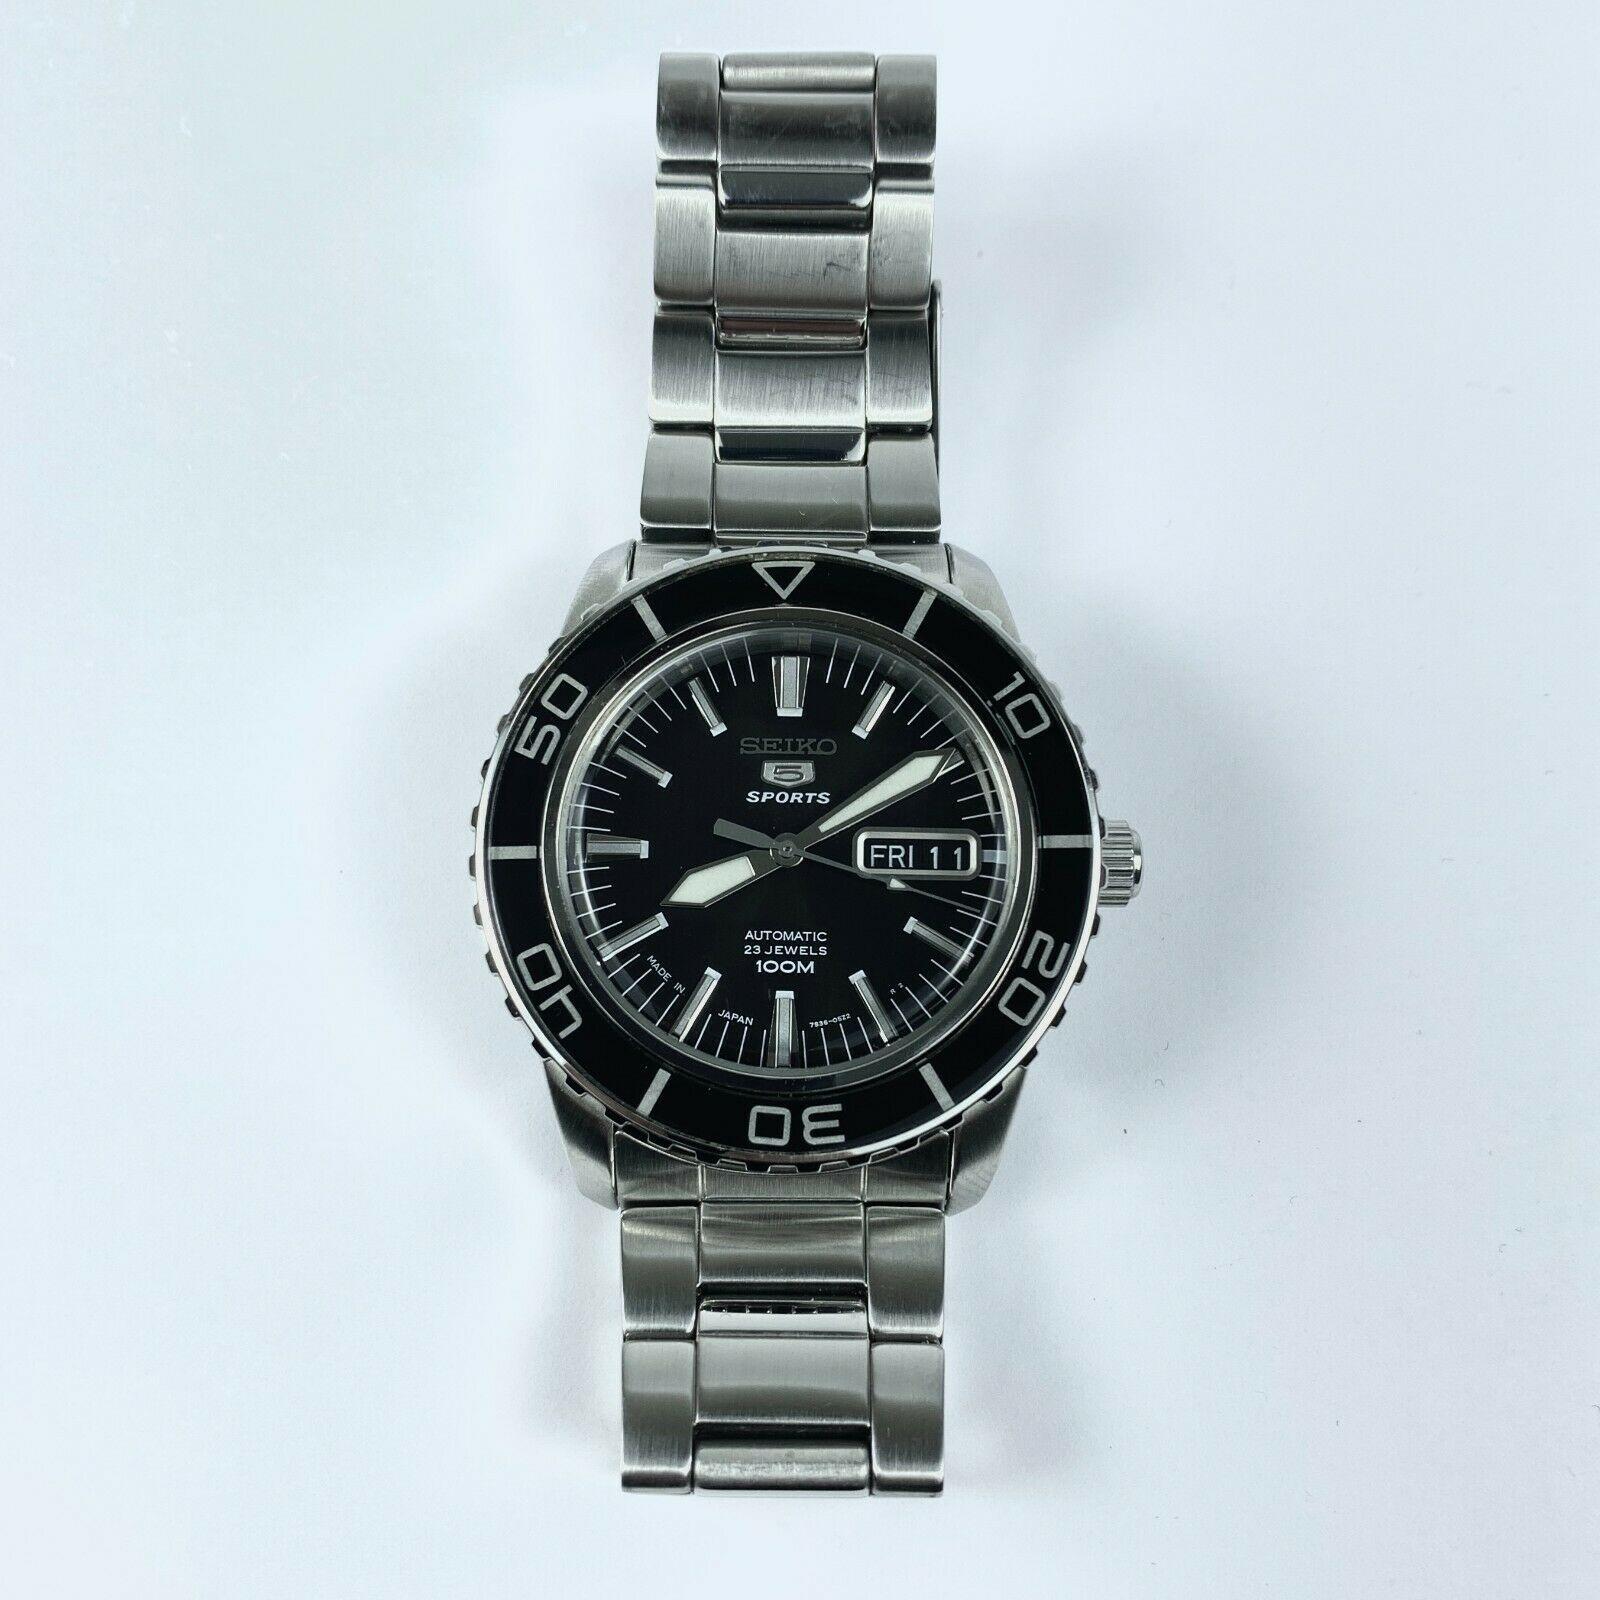 Seiko 5 Sports Stainless Steel SNZH55 7S36-04N0 Divers Automatic Watch |  Barry's Pawn and Jewelry